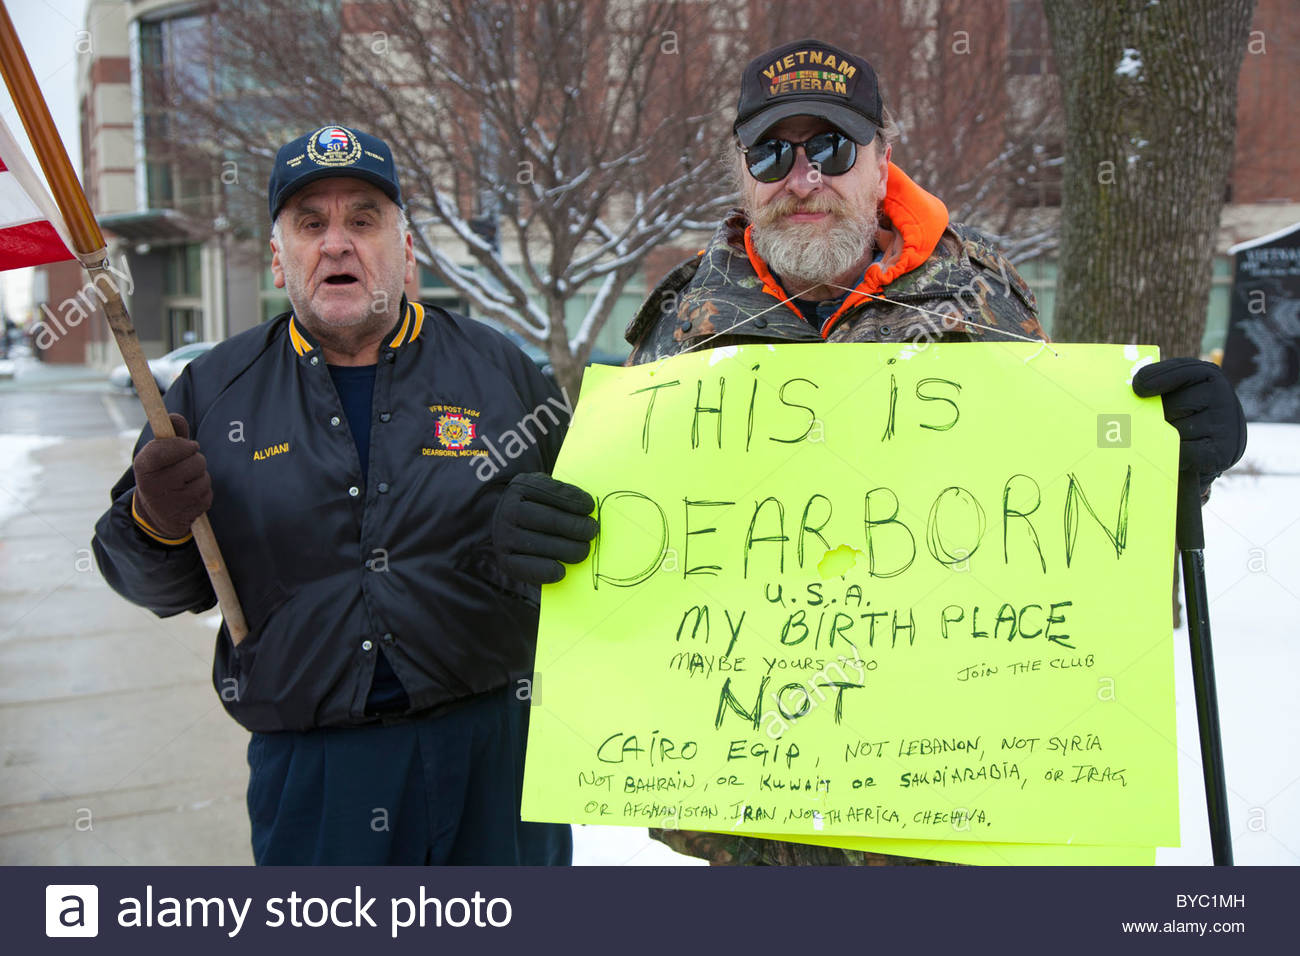 white-american-men-protest-arab-american-rally-in-dearborn-michigan-BYC1MH.jpg